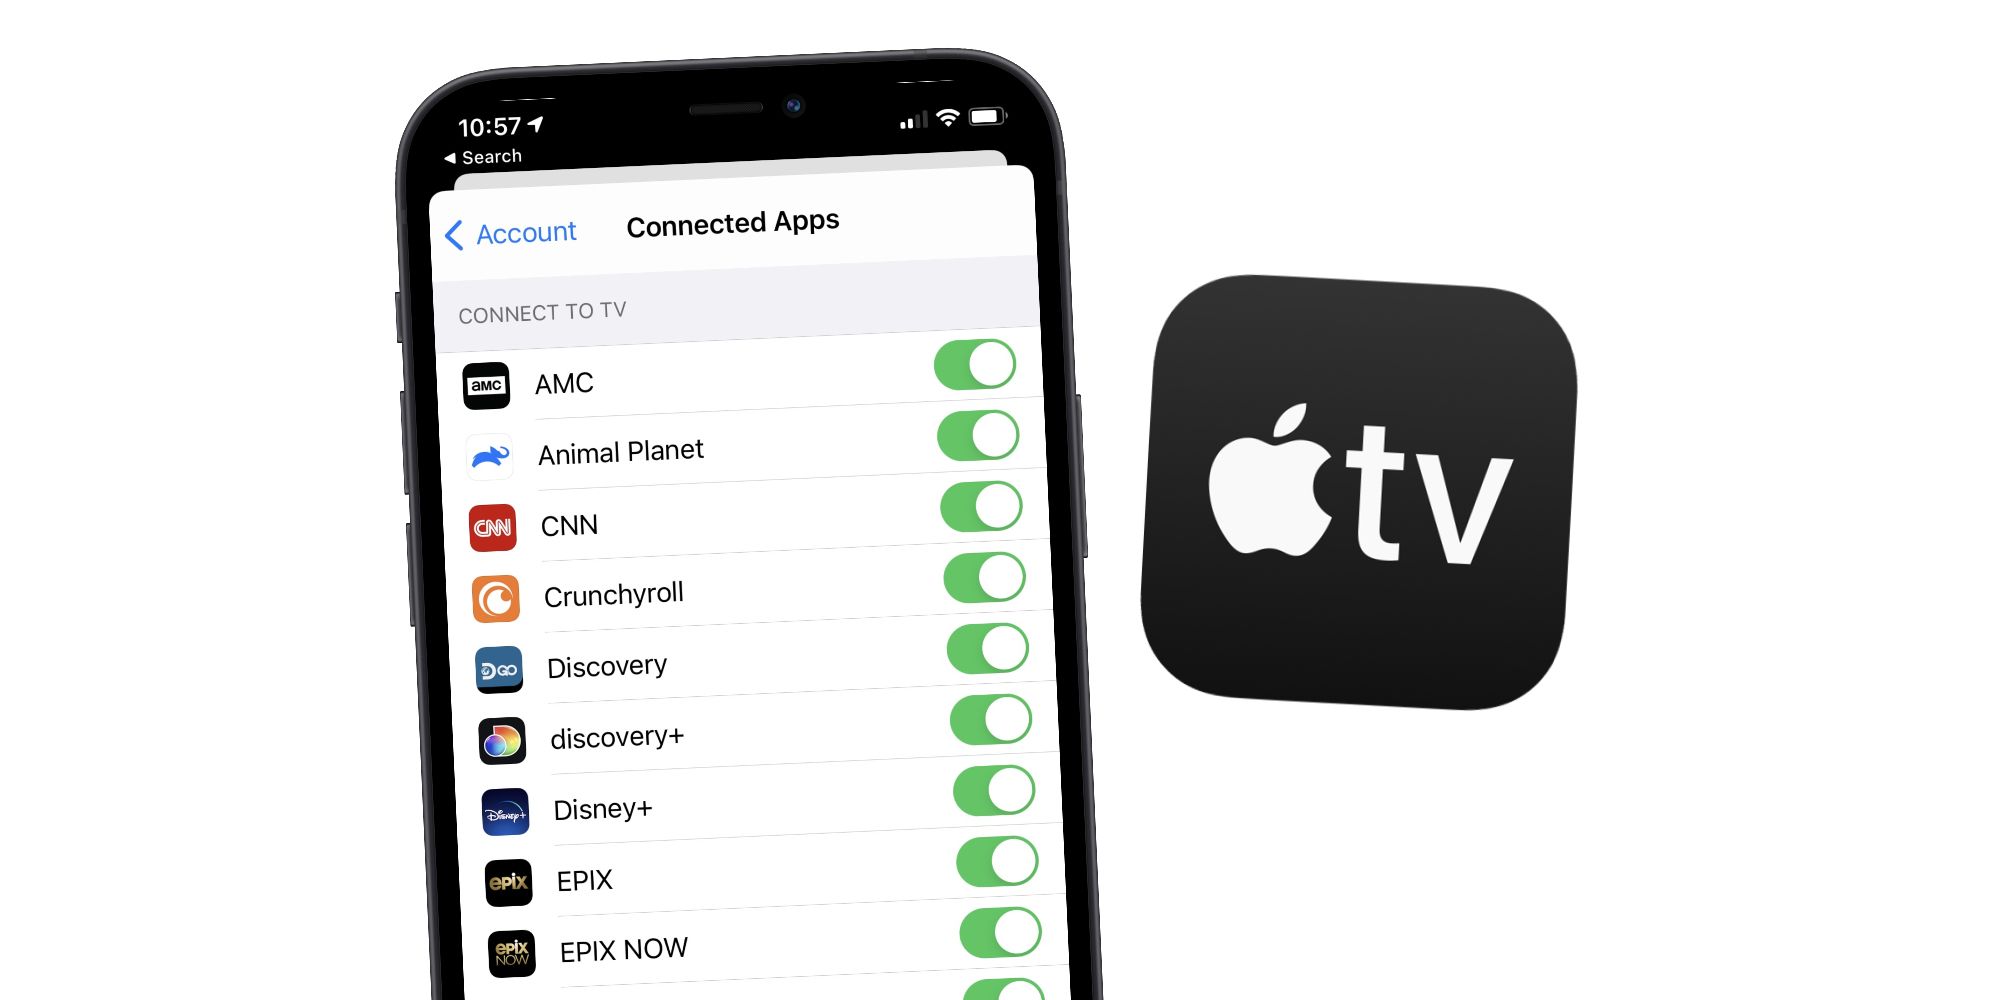 Pirat miles Blacken Apple TV App: How To Link Streaming Services On iPhone